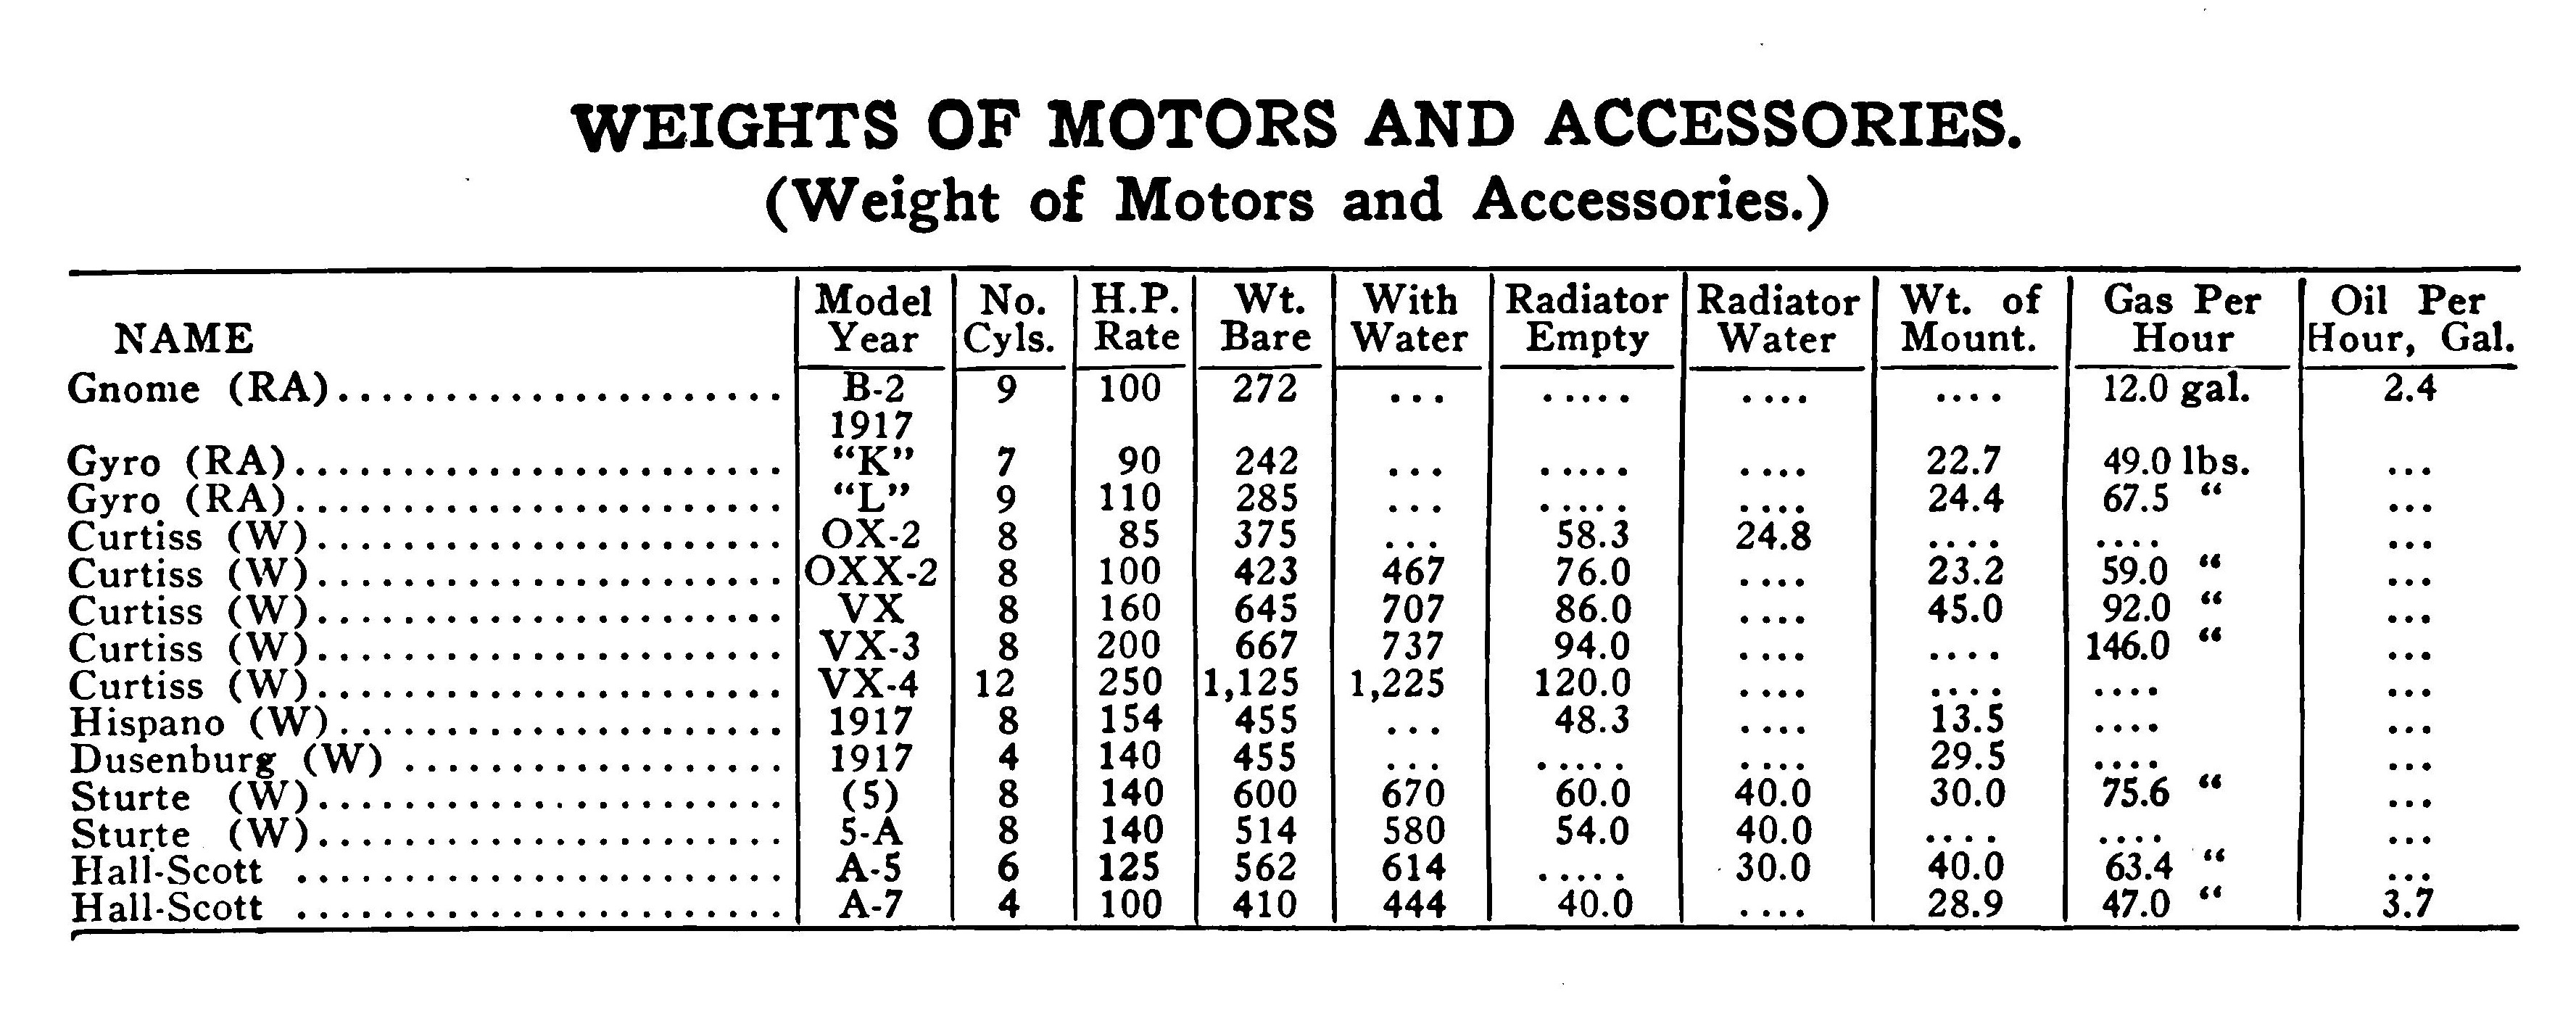 Weights of Motors and Accessories Table